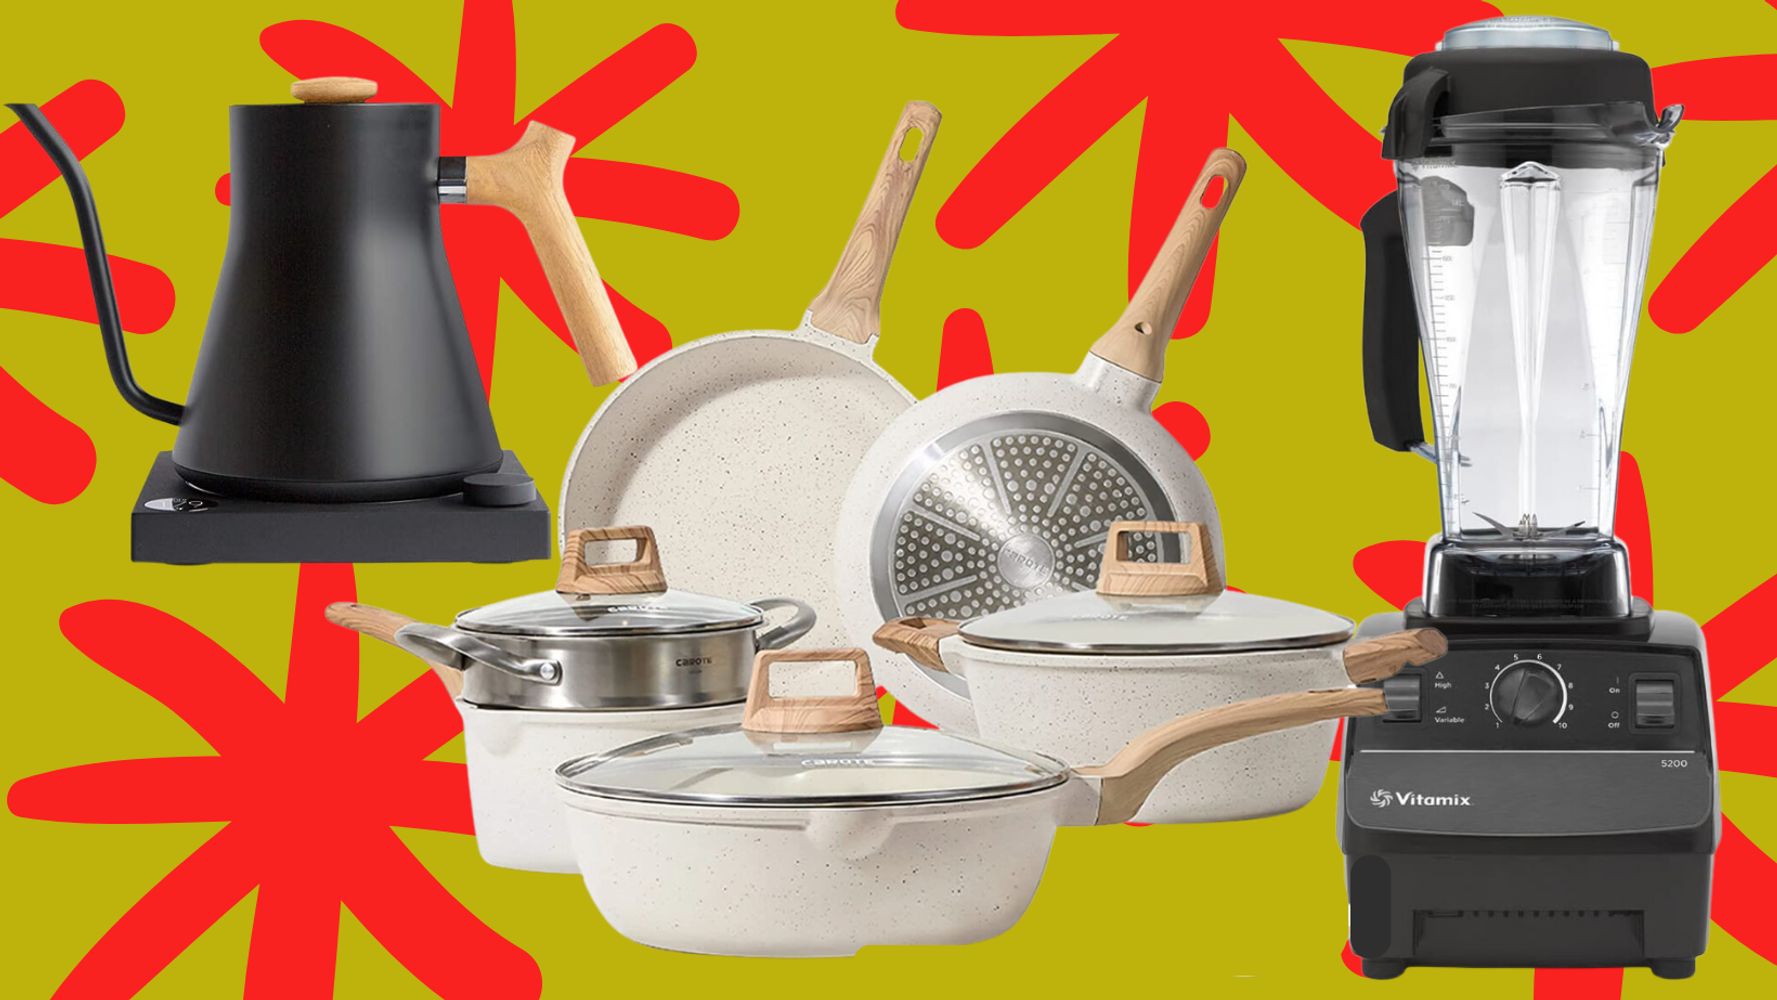 Carote 17-Piece Cookware Set w/ Removable Handles $69.99 Shipped